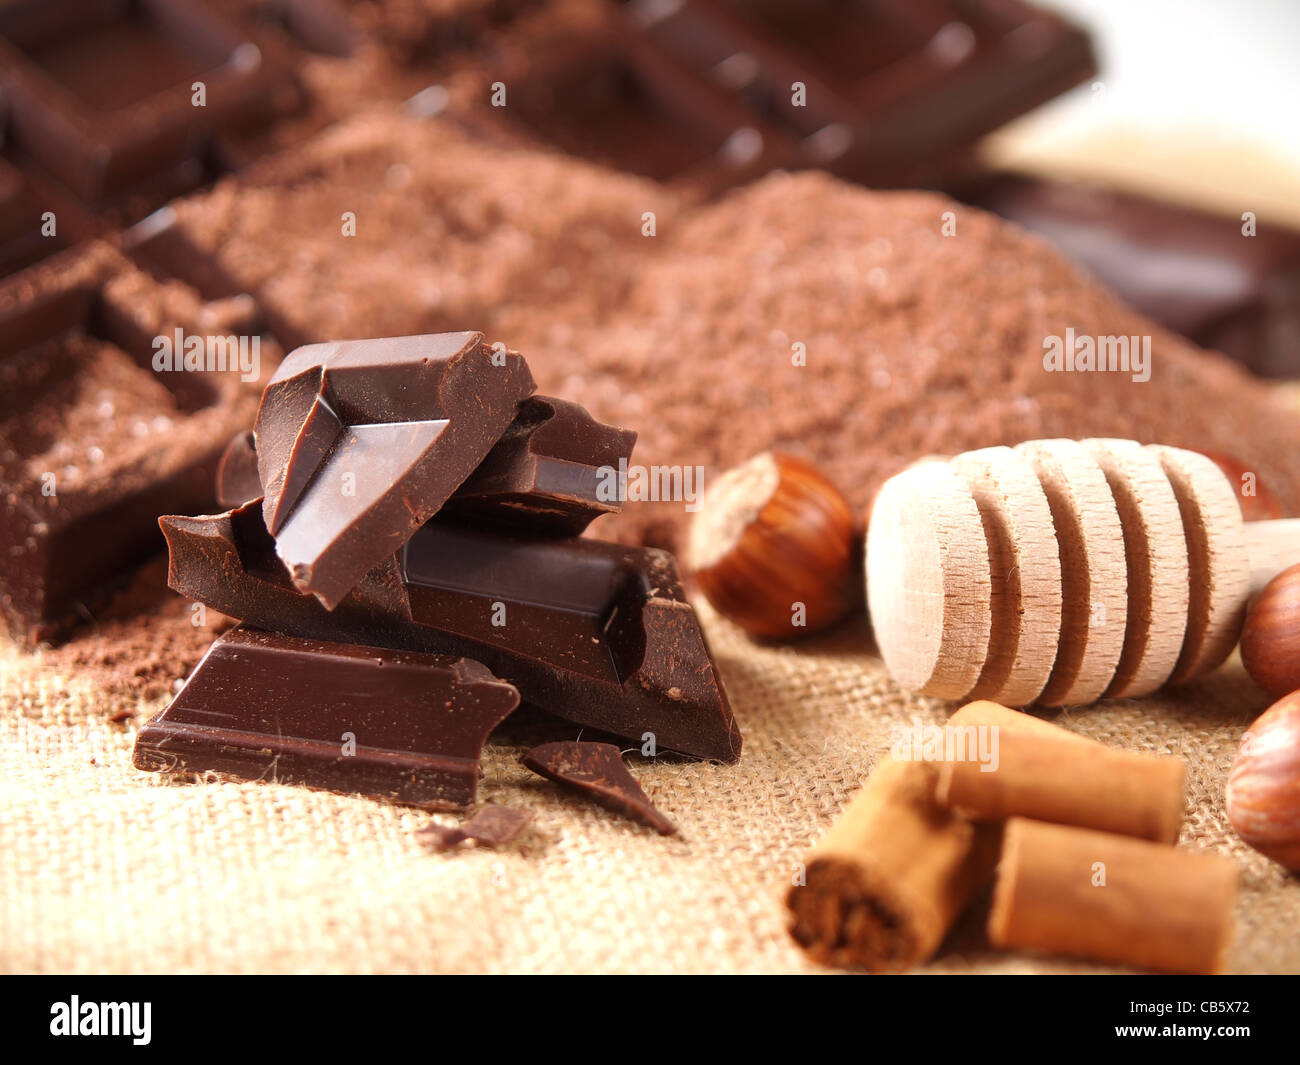 belgian chocolate bars, nuts and cocoa powder Stock Photo